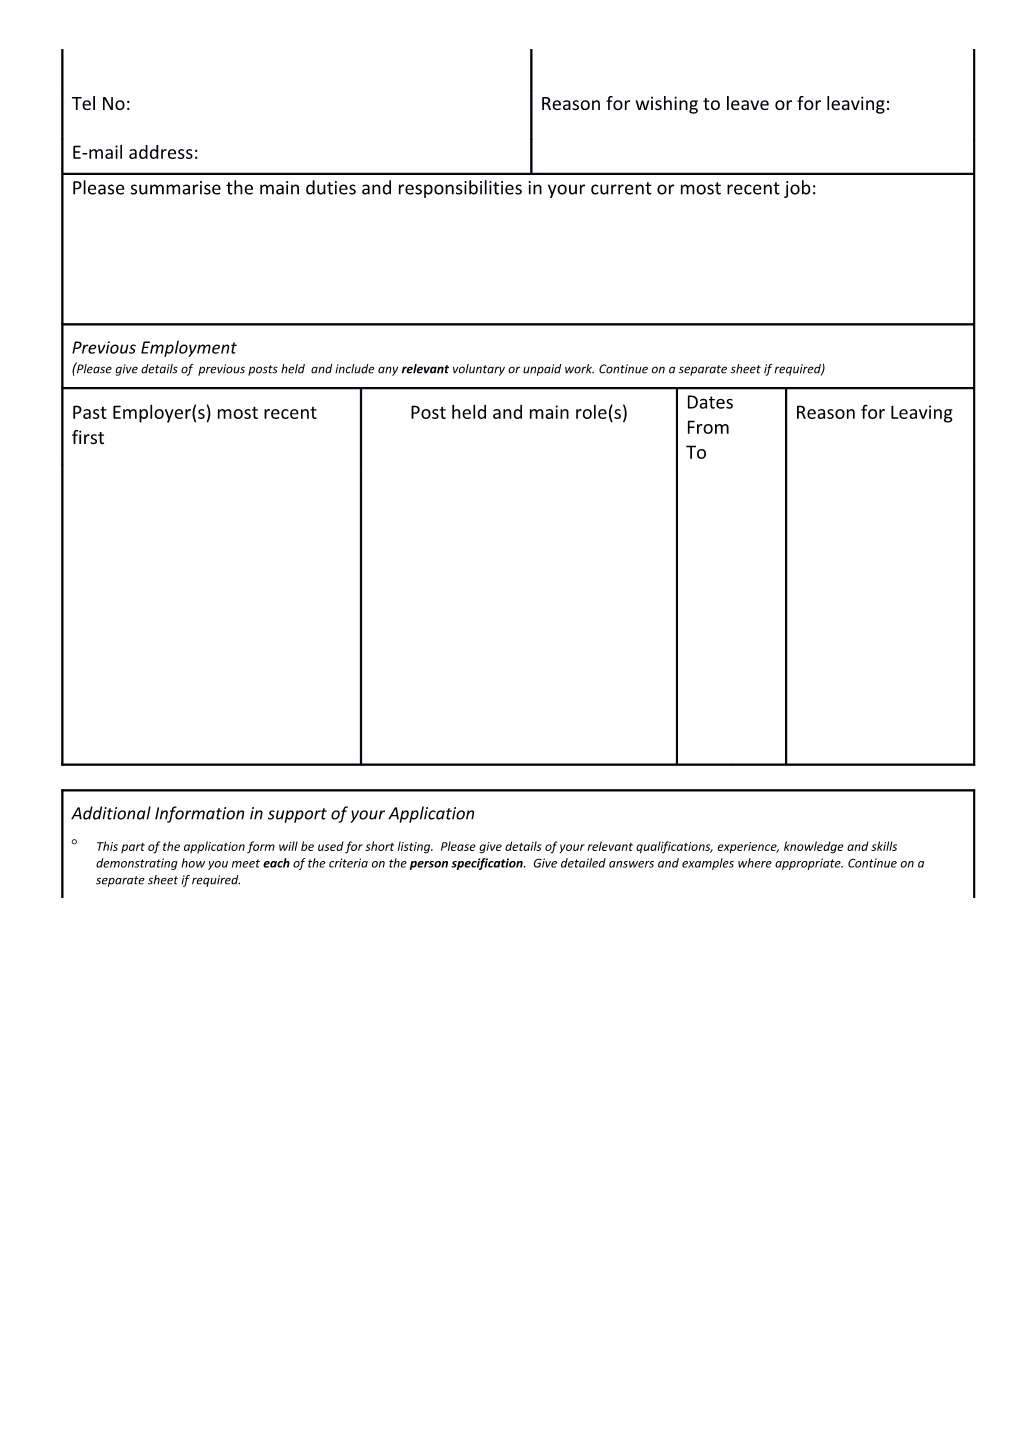 Type Or Write Clearly Using Black Ink. Return the Form by Email To